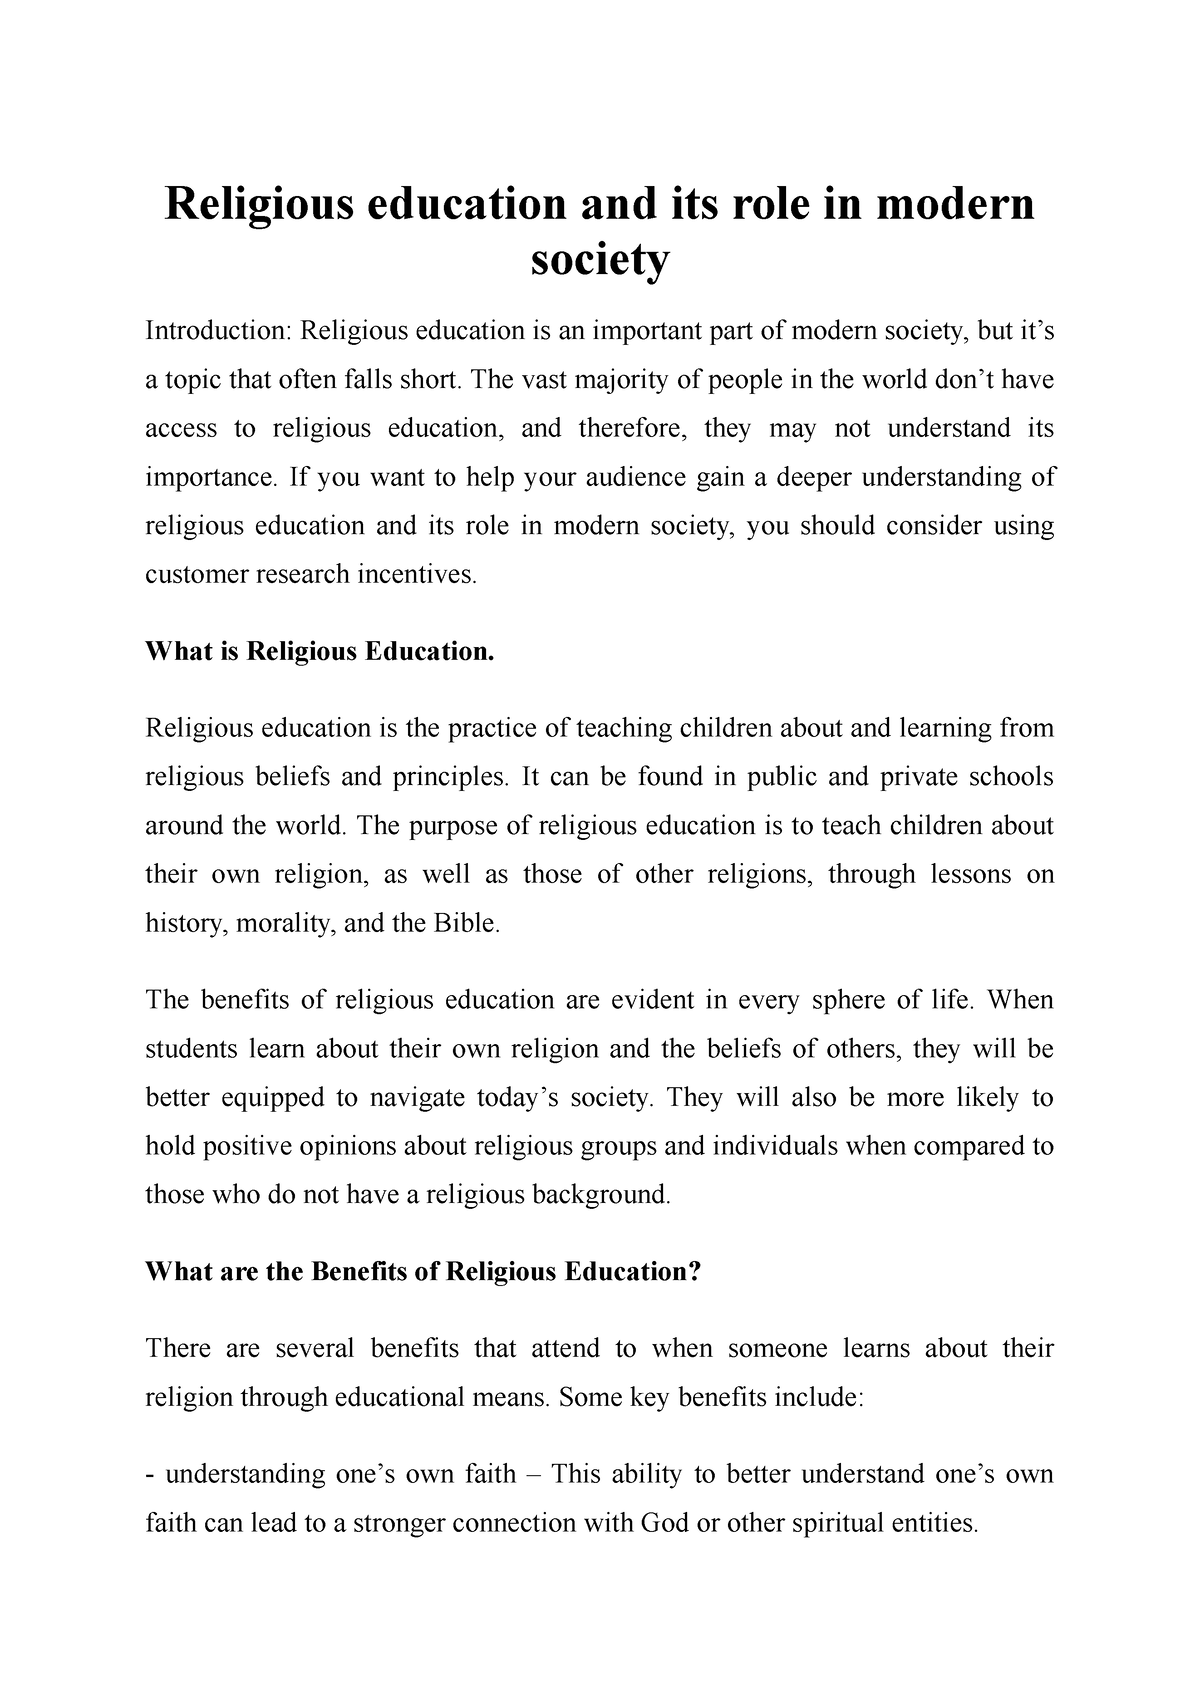 challenges of religious education